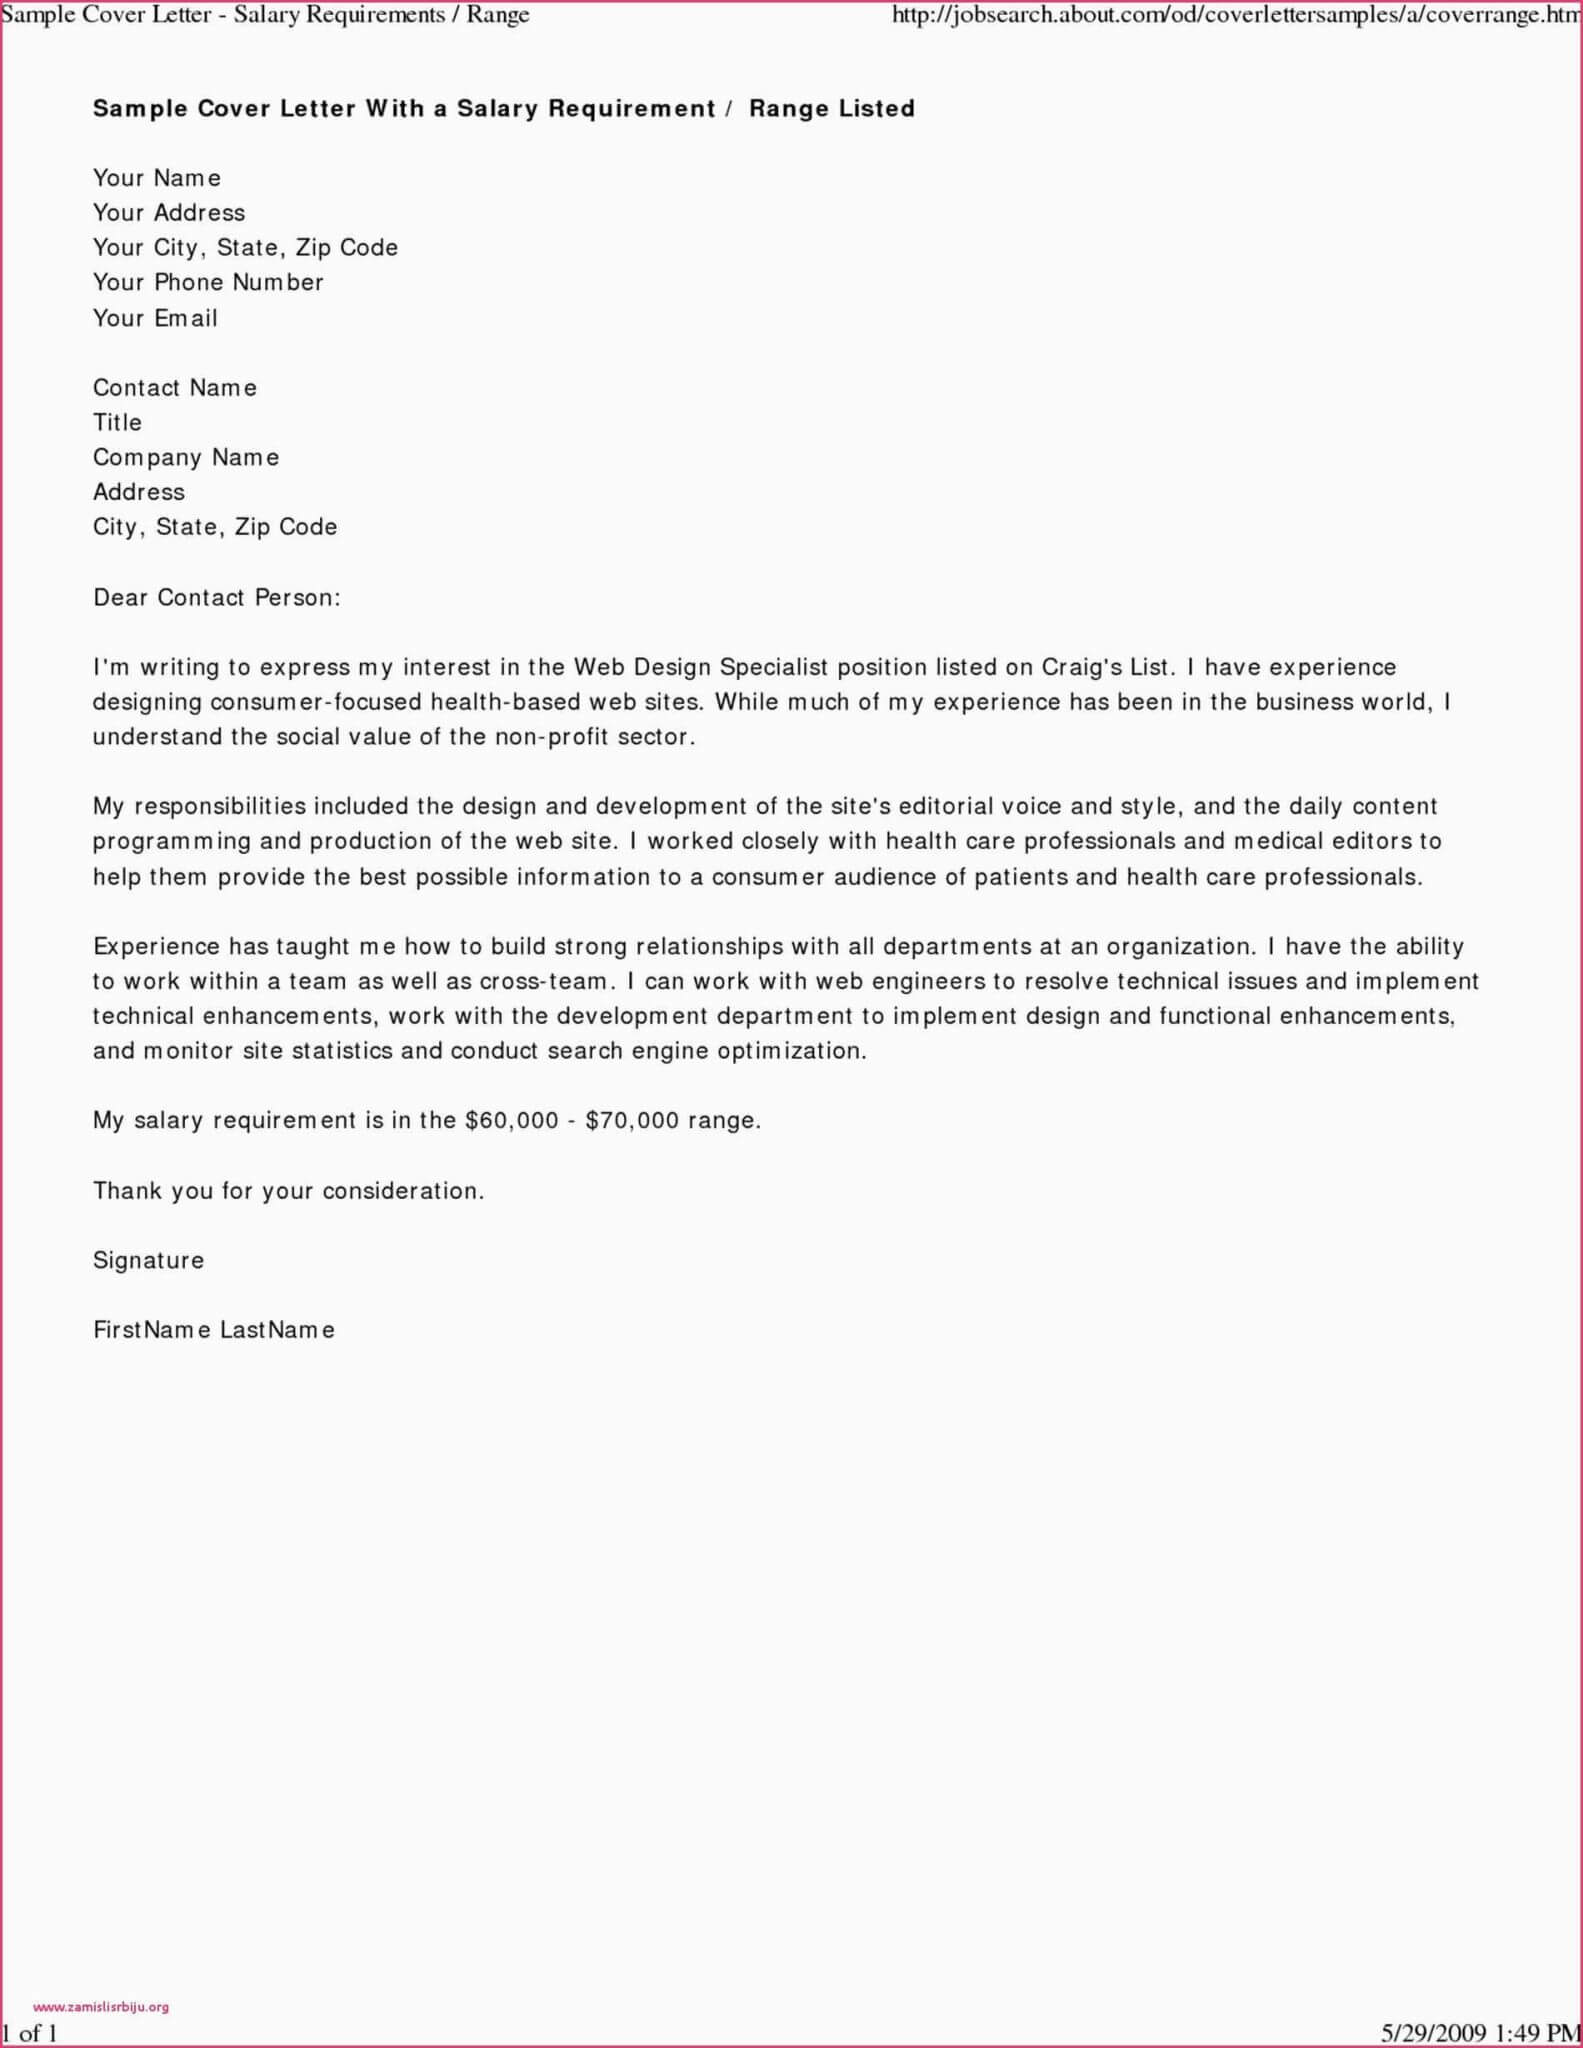 Sample Letter Requesting Sales Tax Exemption Certificate For Resale Certificate Request Letter Template